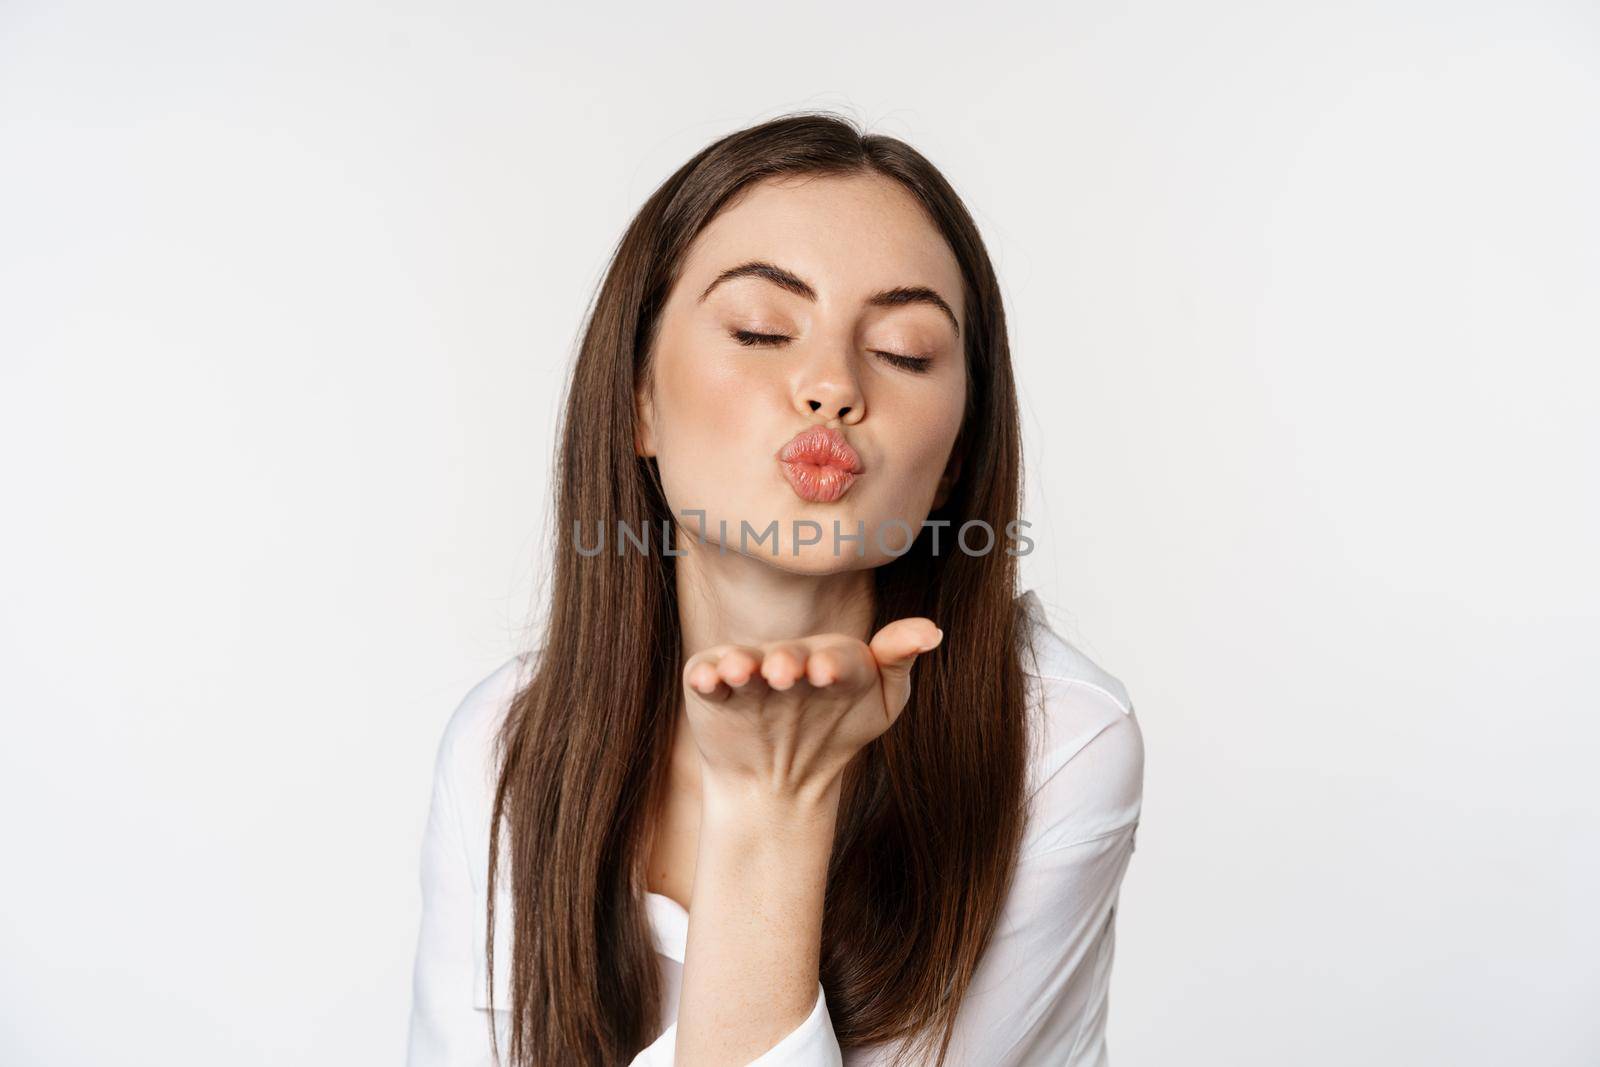 Feminine woman sending air kiss at camera, coquettish flirty pose, kissing, standing over white background. Copy space